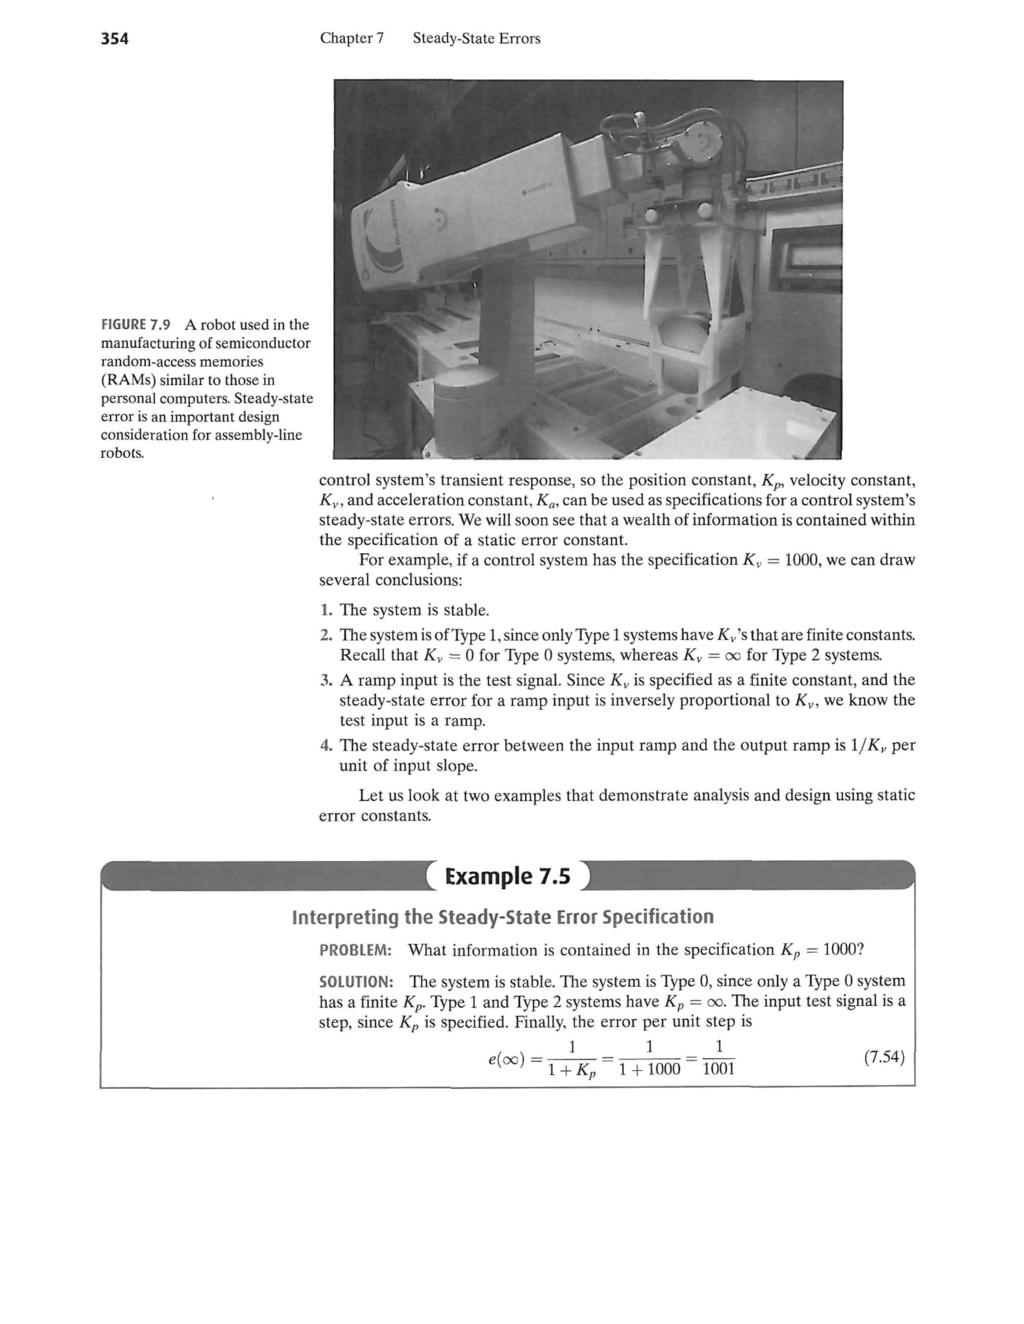 354 Chapter 7 Steady-State Errors FIGURE 7.9 A robot used in the manufacturing of semiconductor random-access memories (RAMs) similar to those in personal computers.